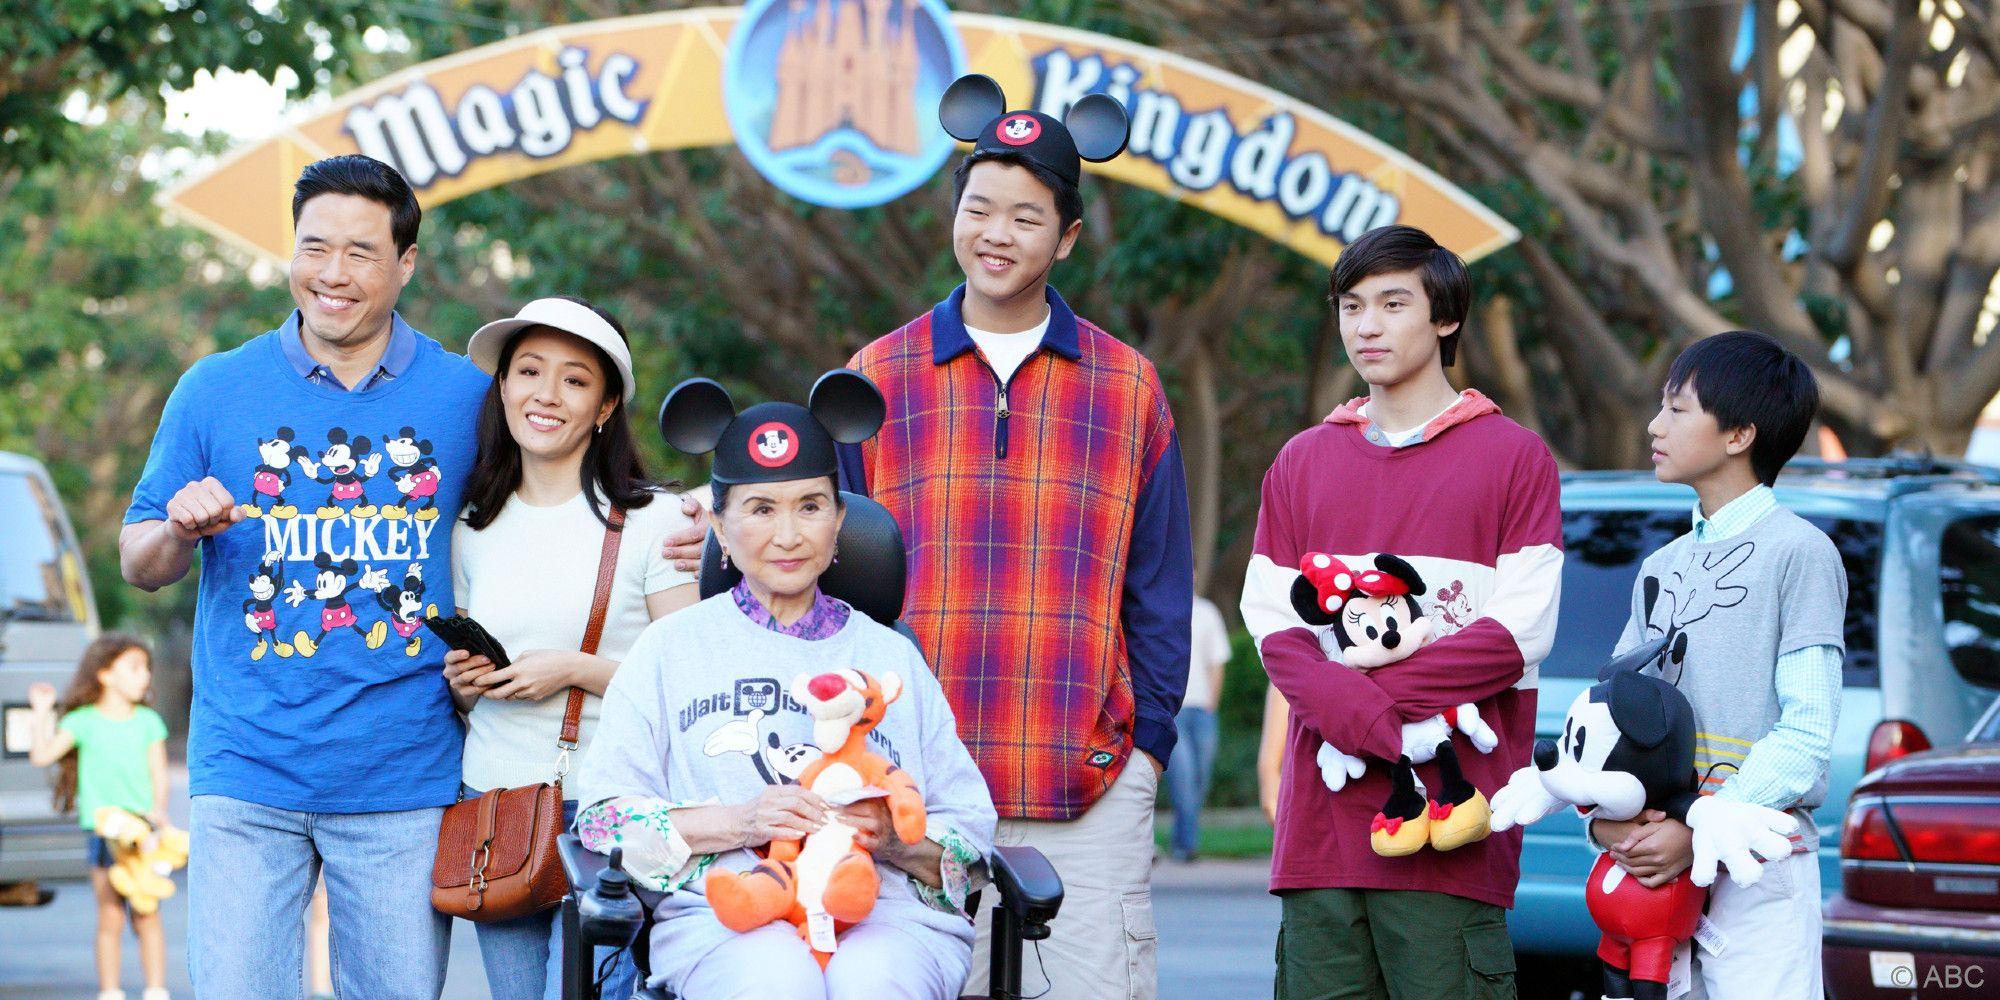 The characters from Fresh off the Boat dressed up at Magic Kingdom.